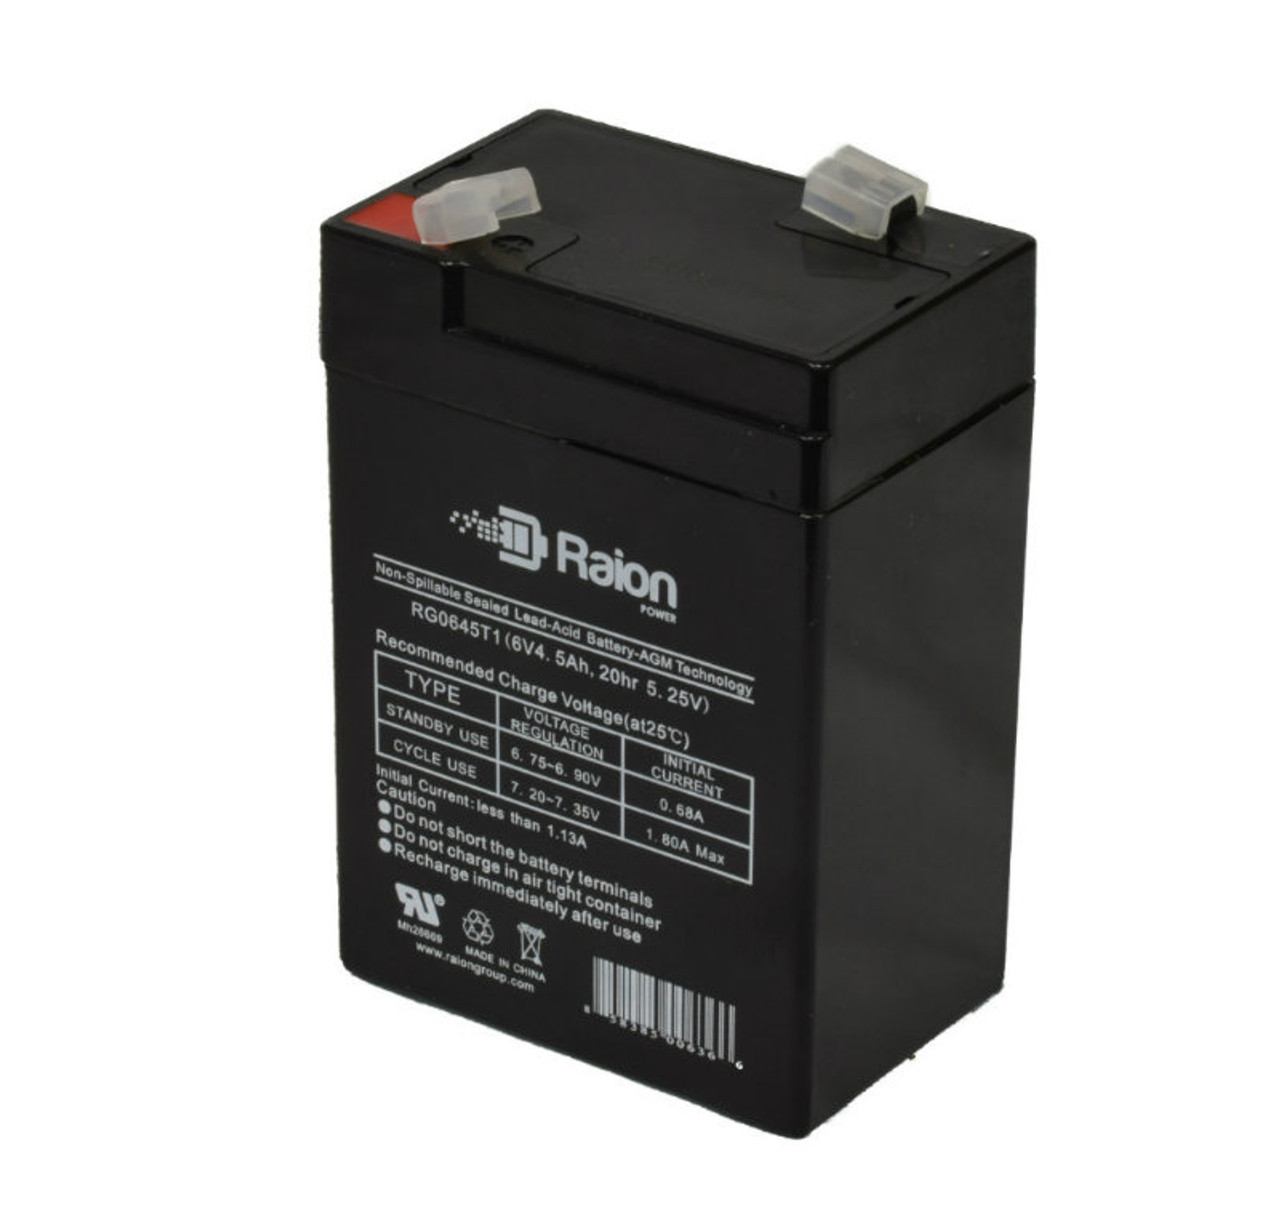 Raion Power RG0645T1 6V 4.5Ah Replacement Battery Cartridge for Nellcor N-600 Oximax